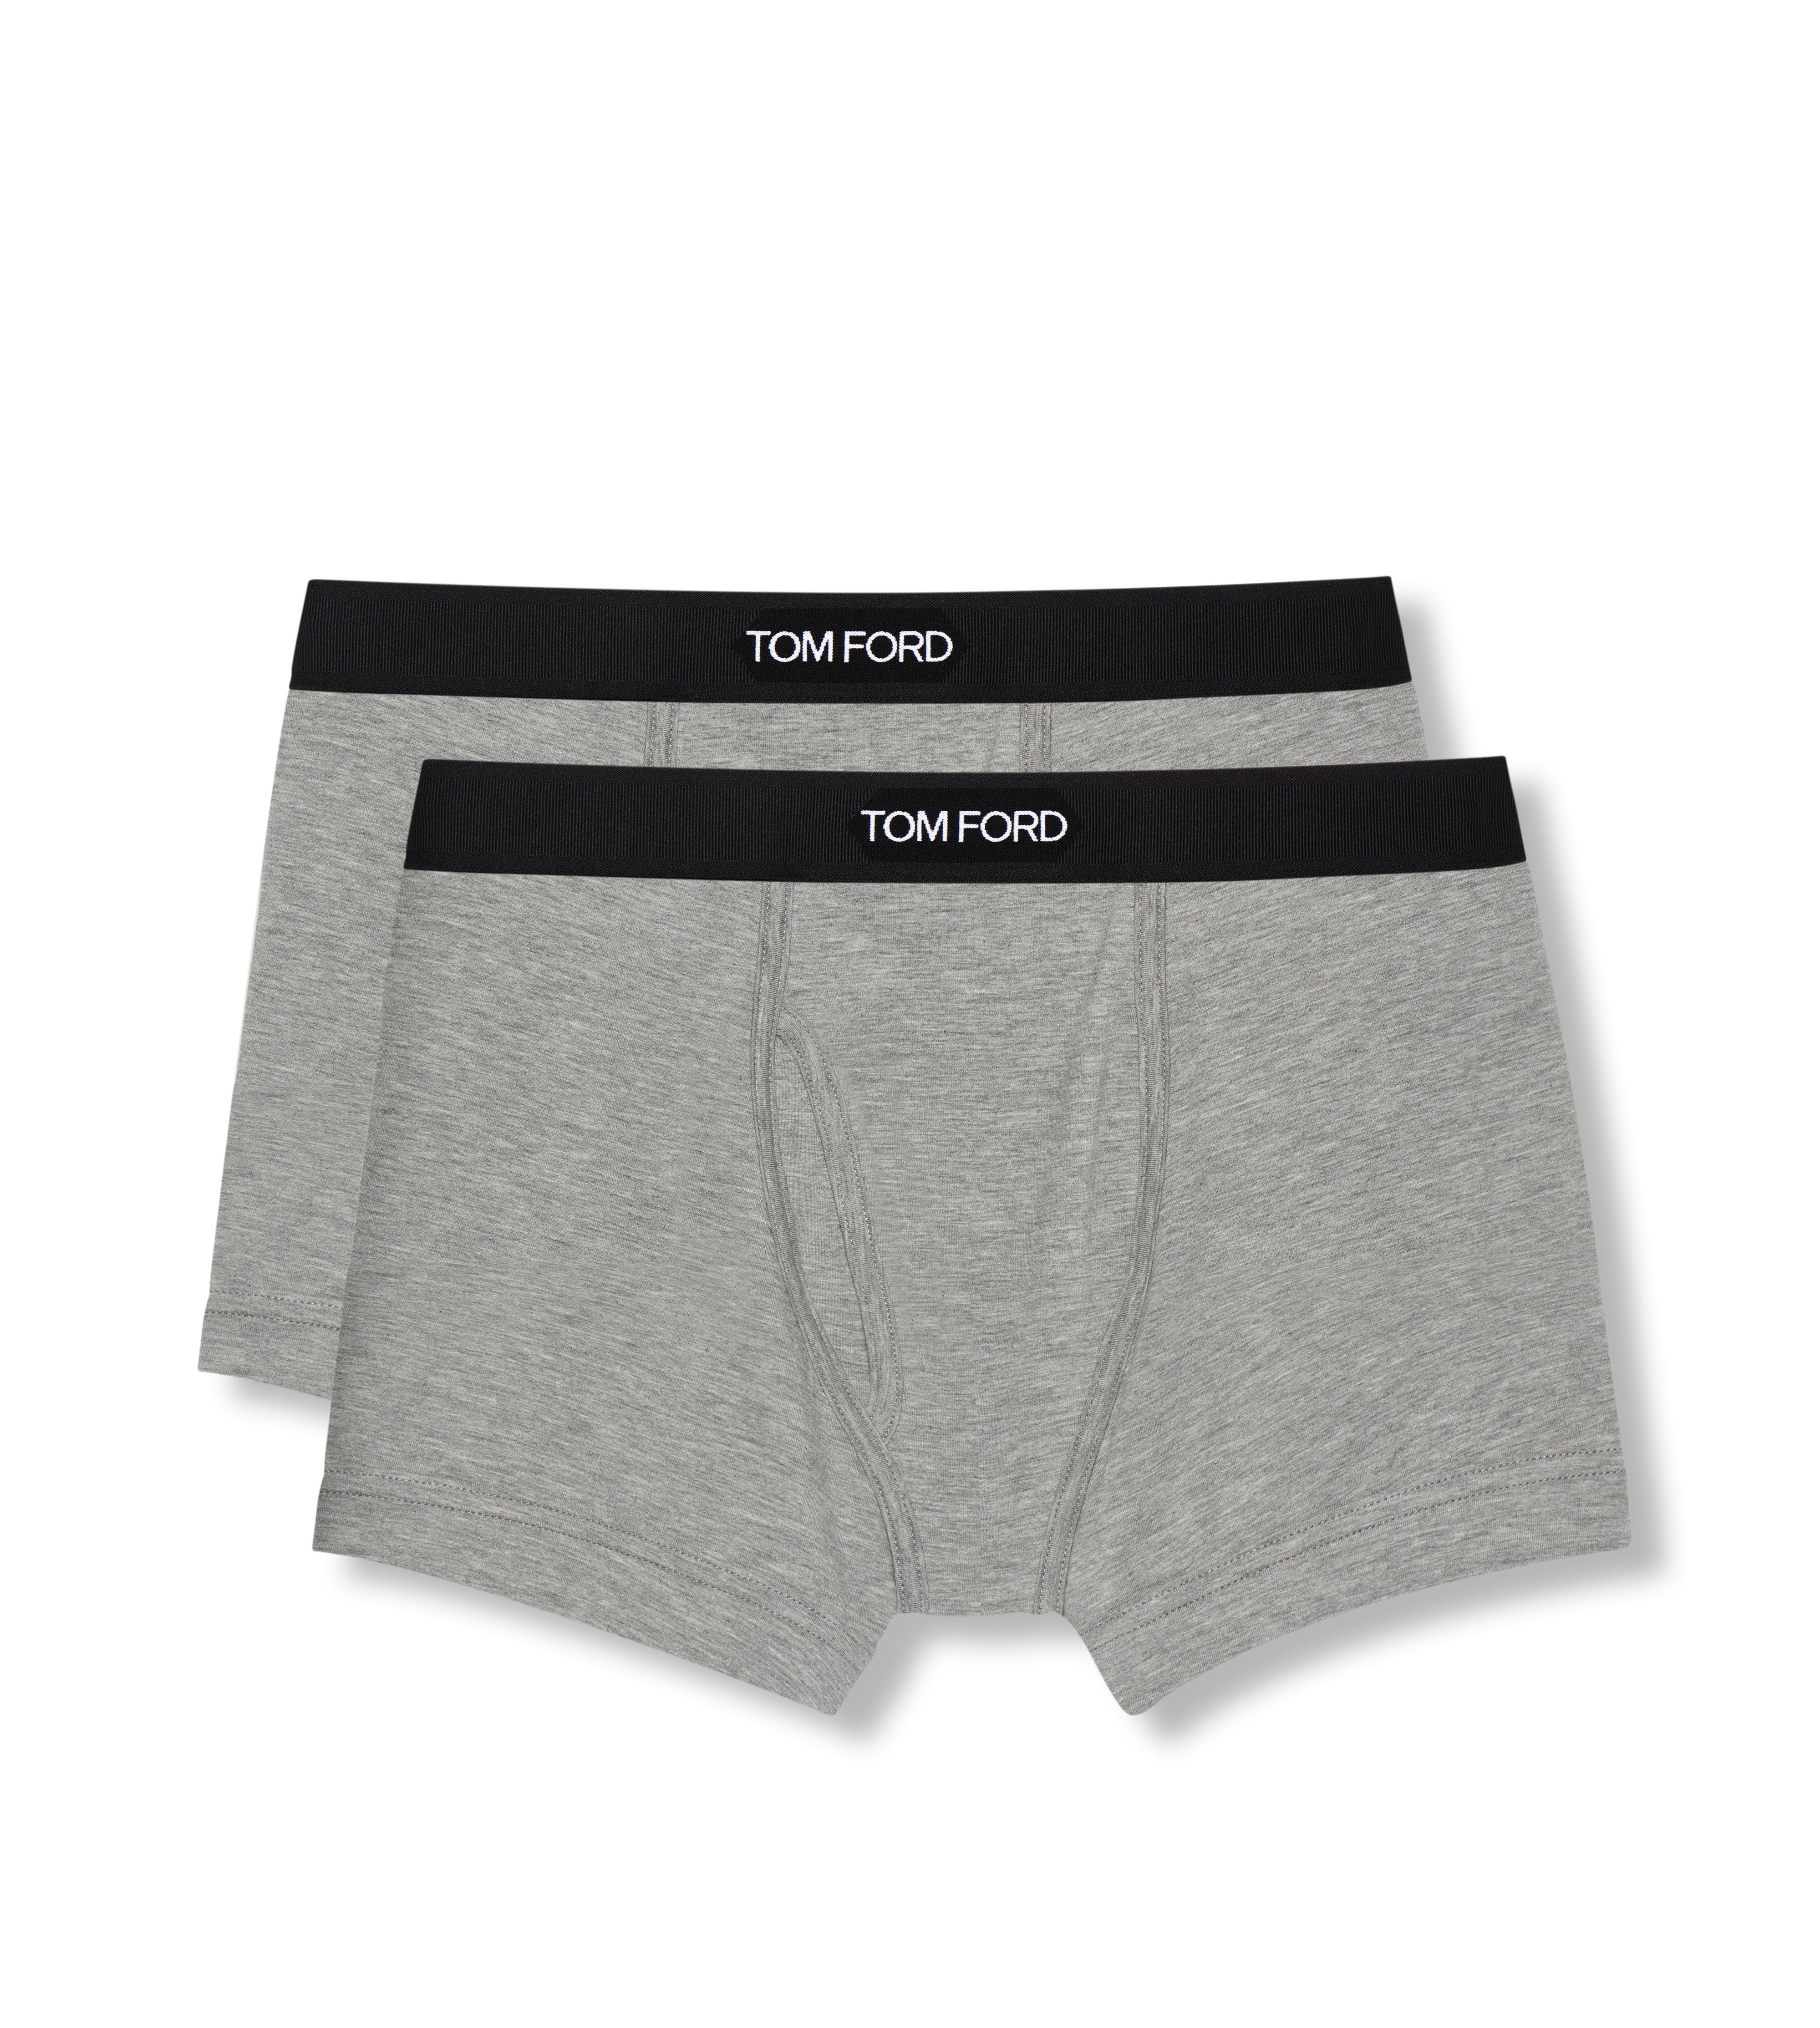 Tom Ford COTTON MODAL BOXER BRIEFS TWO PACK 